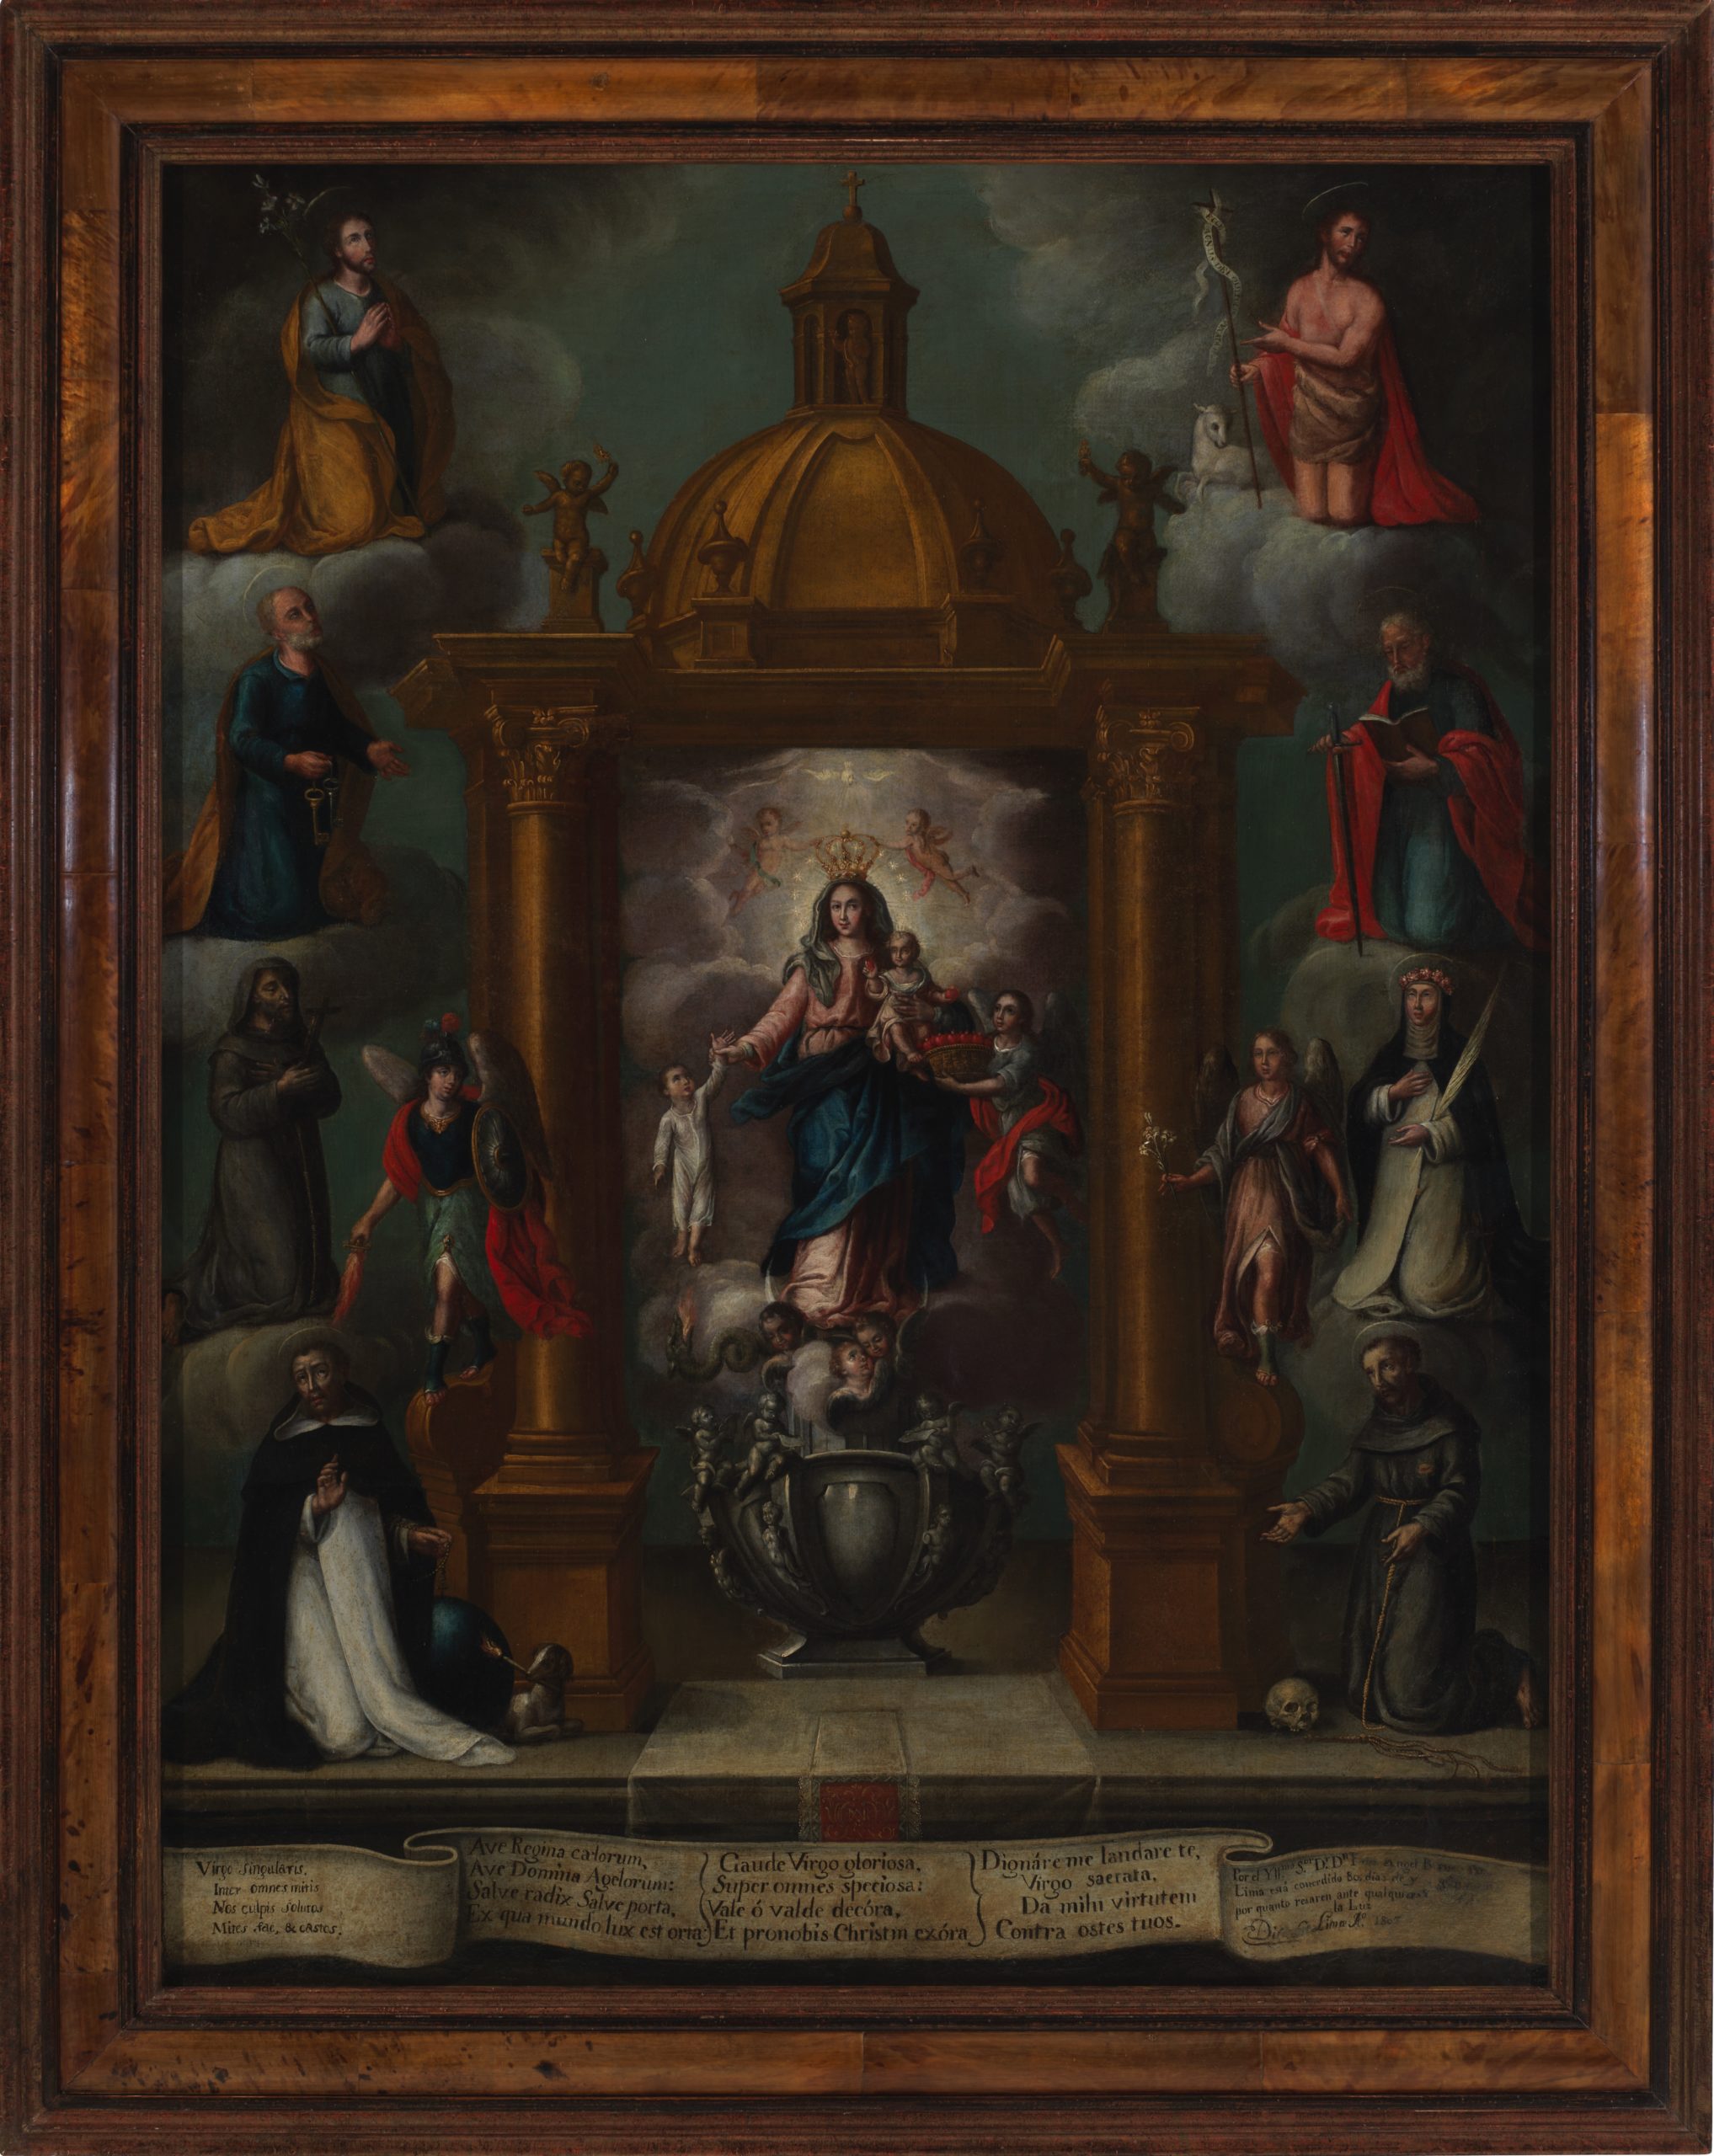 A painting depicting the iconography of Our Lady of the Light.